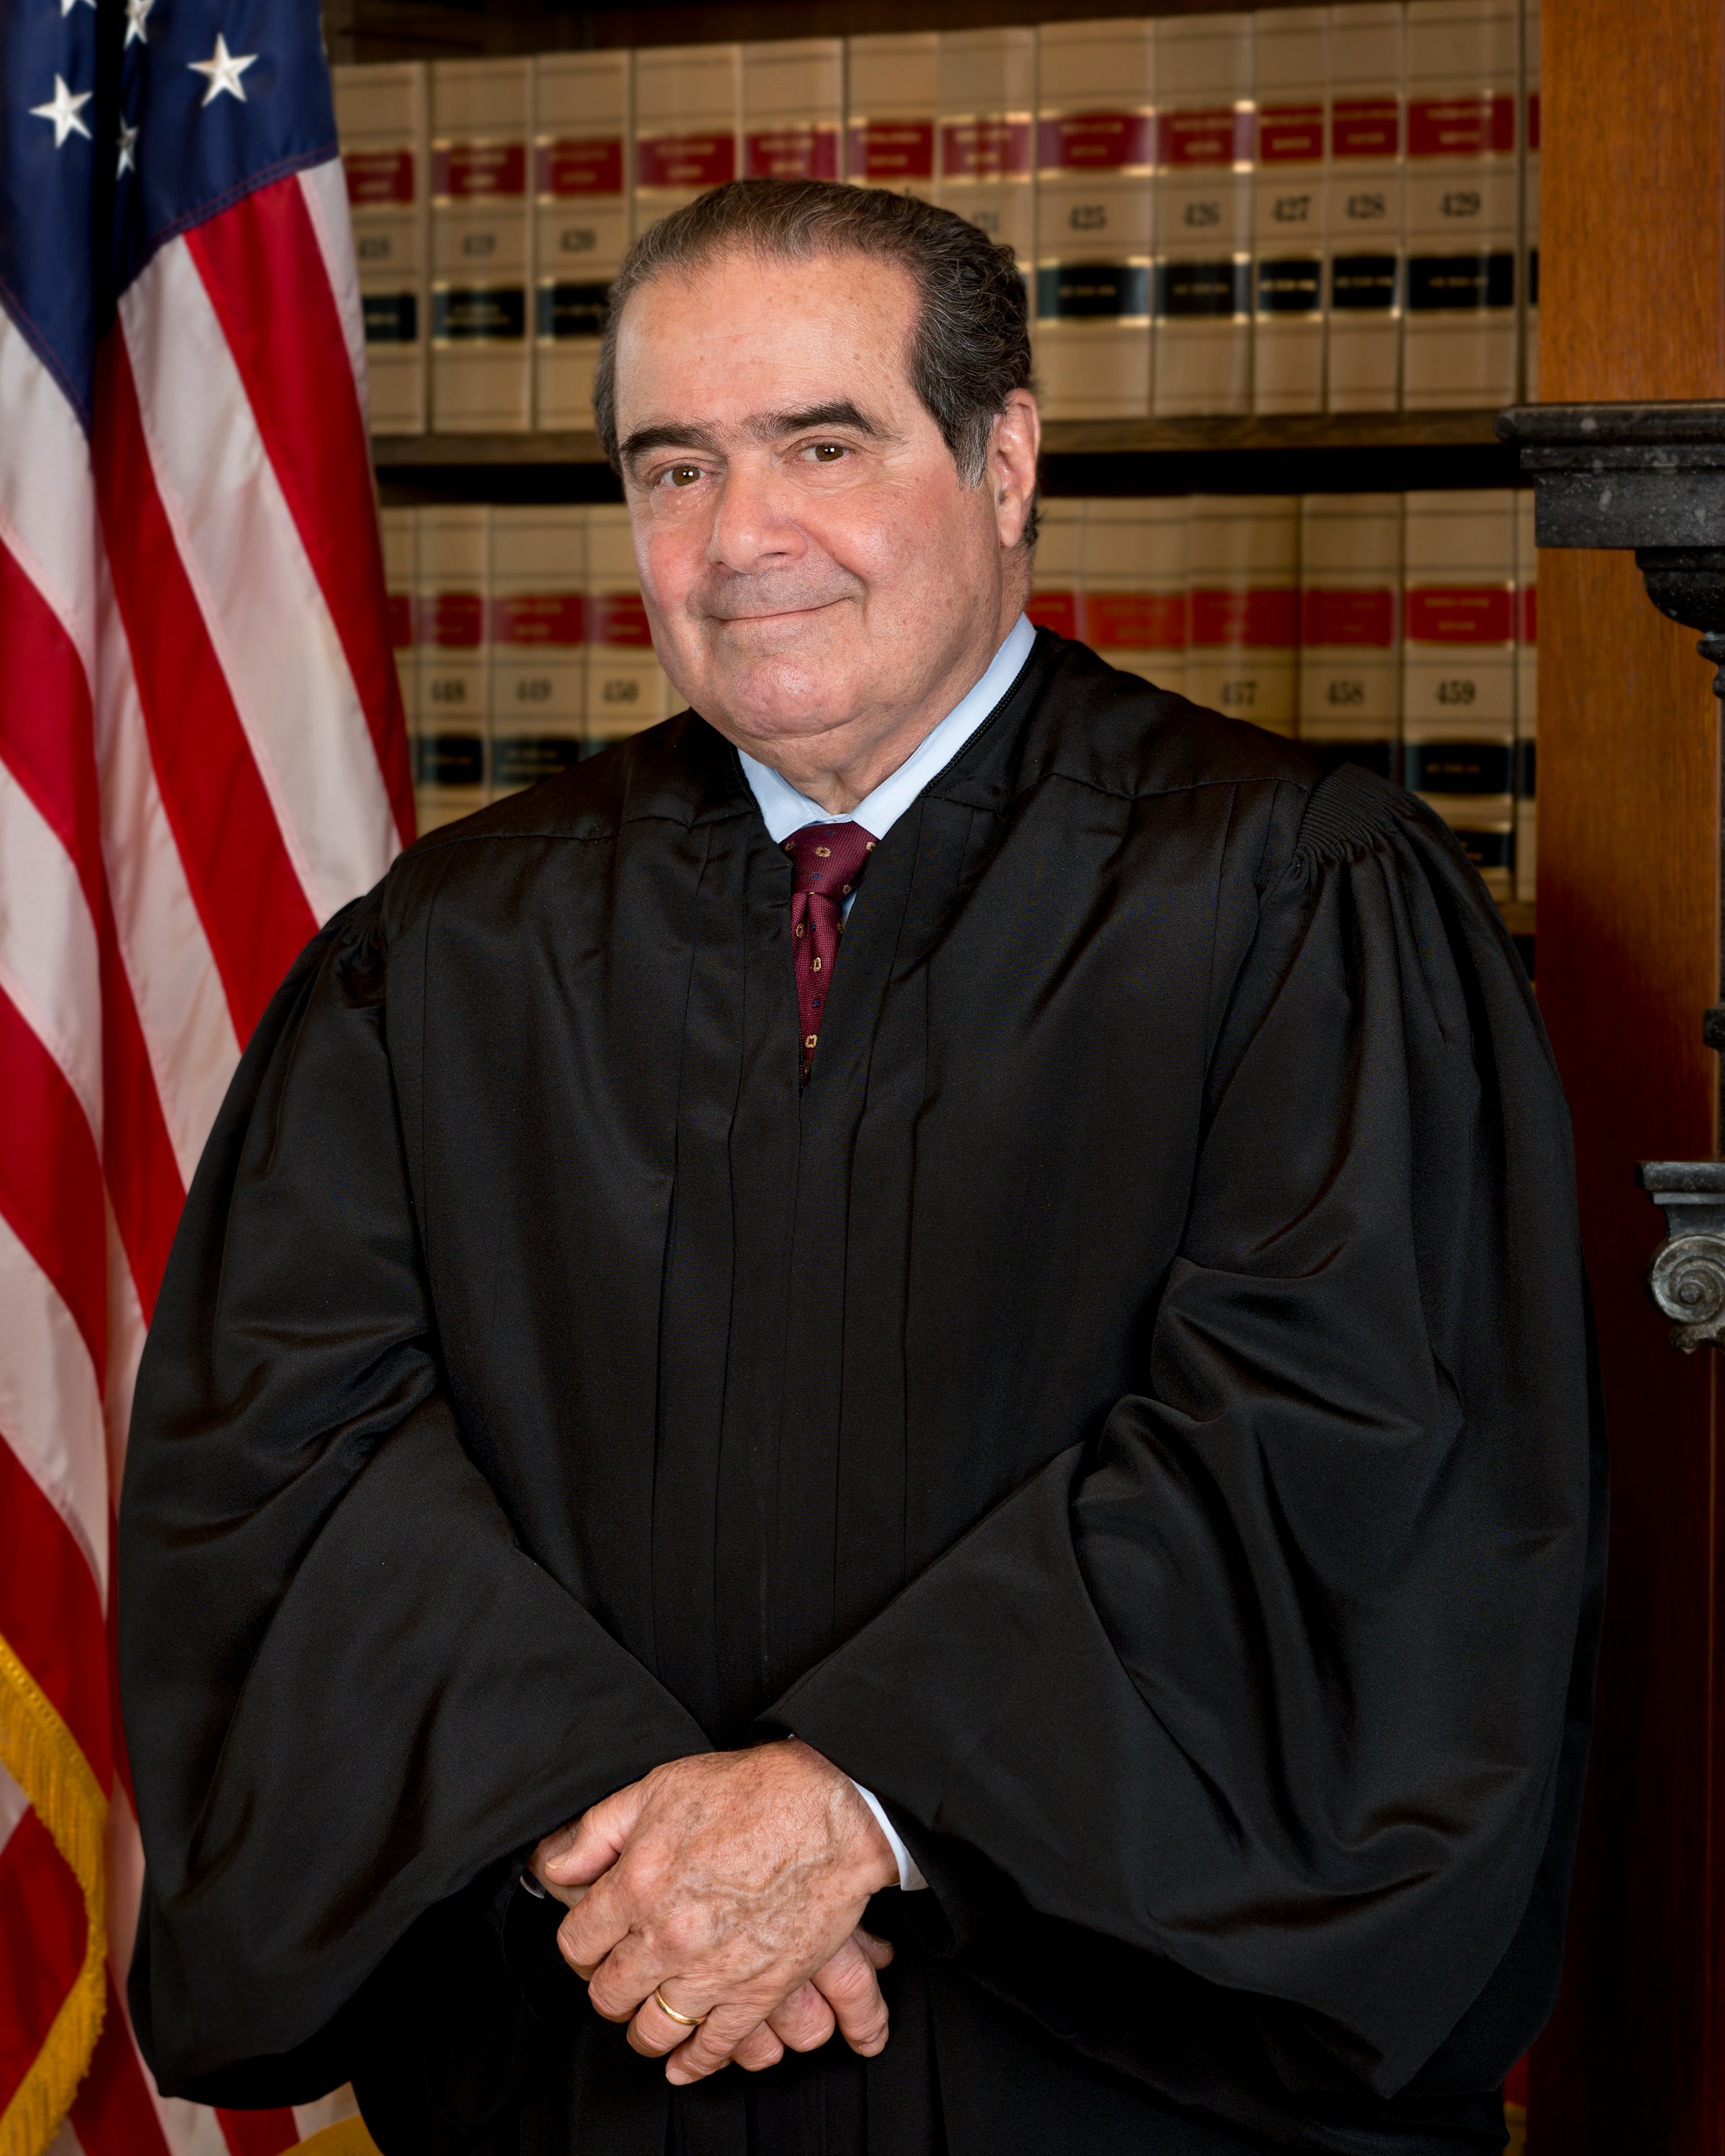 Former Justice Antonin Scalia: Do you want to know how he actually died?